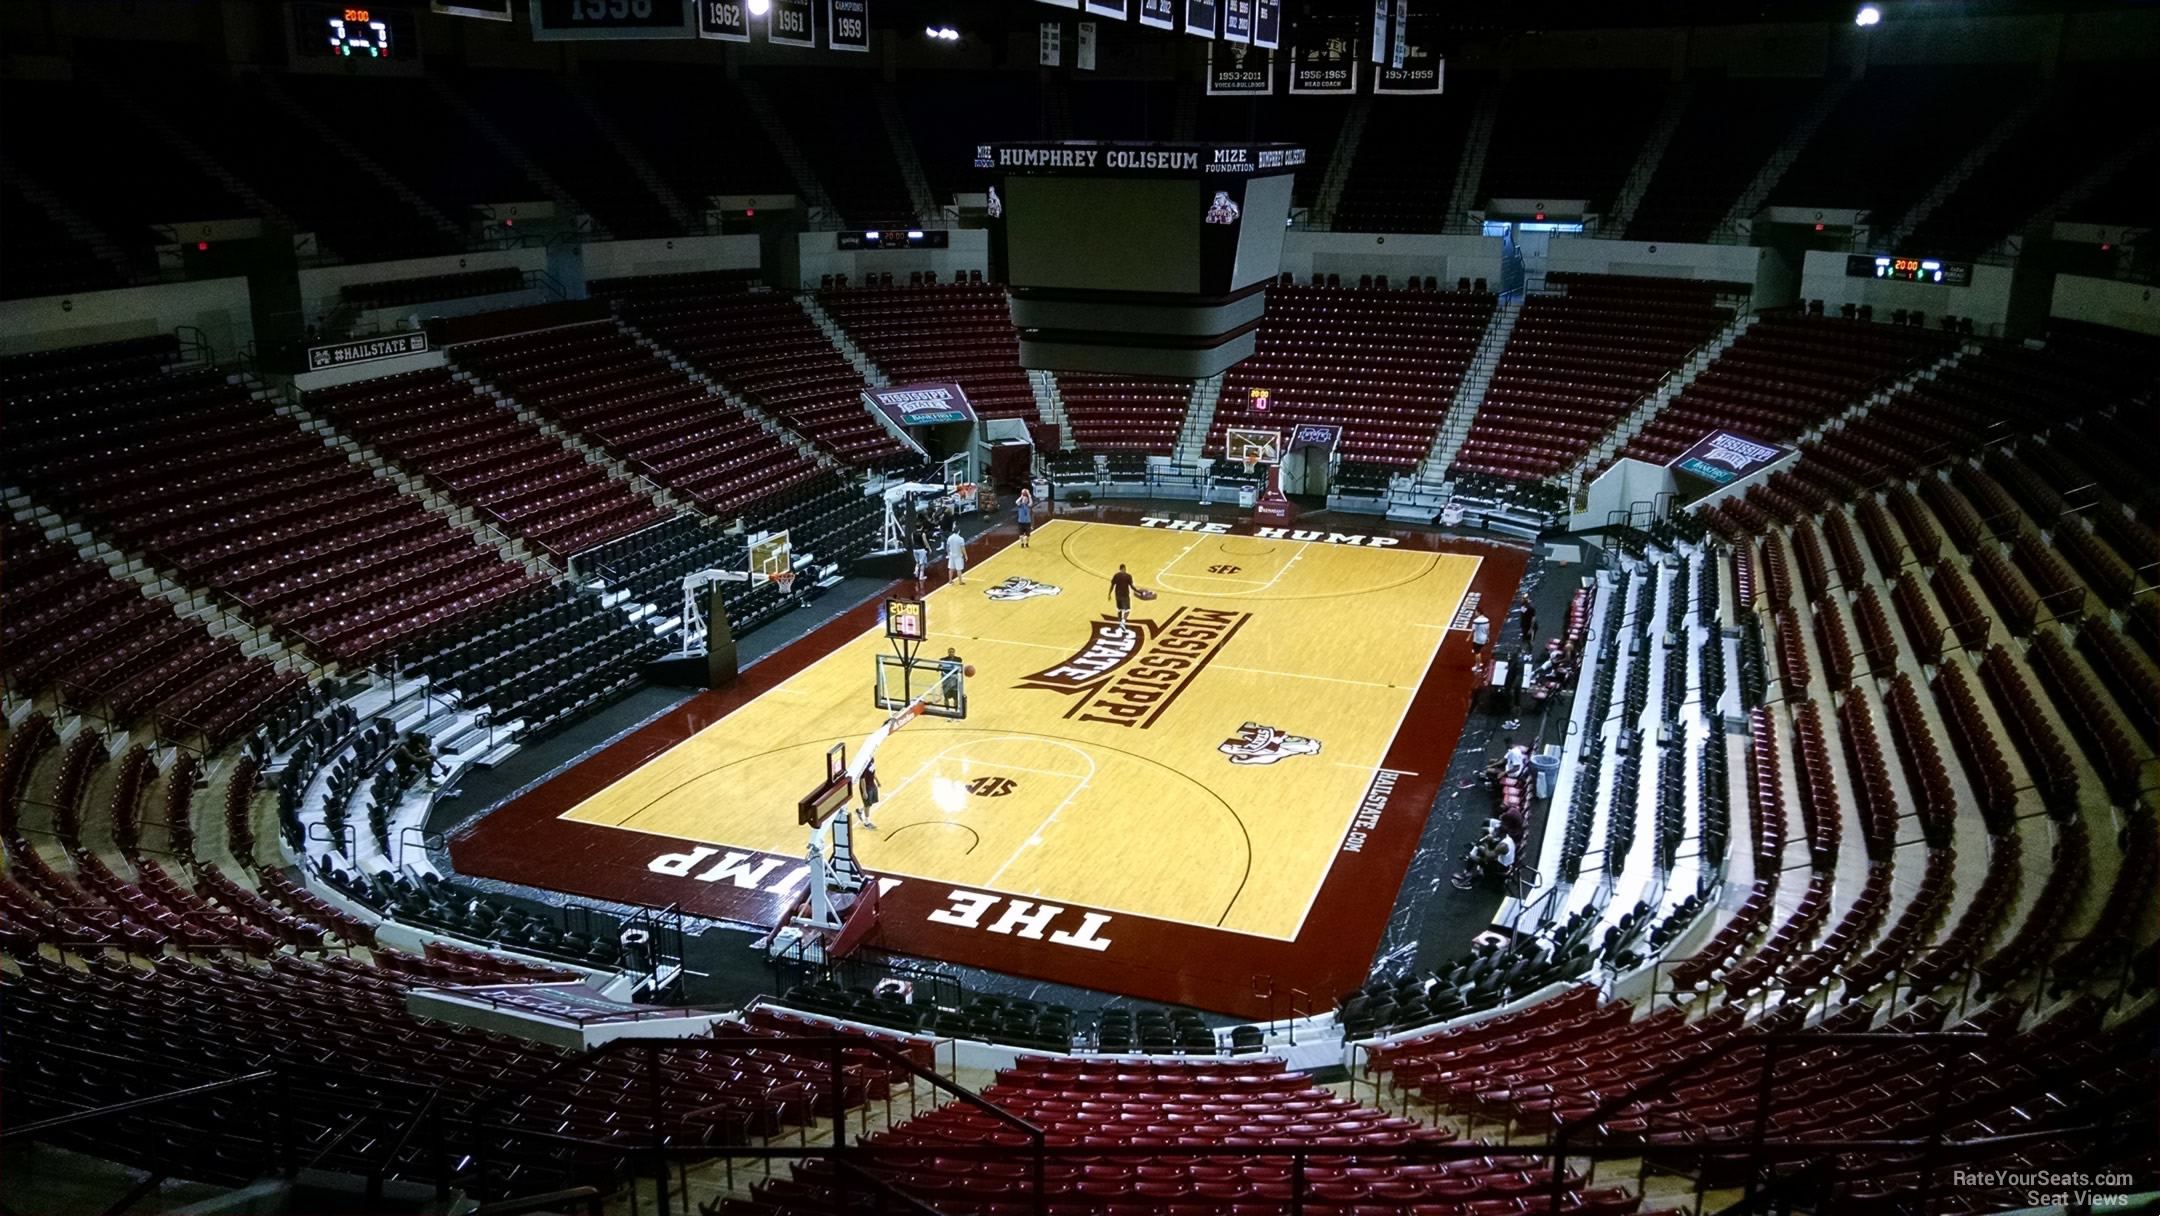 section 235, row 8 seat view  - humphrey coliseum